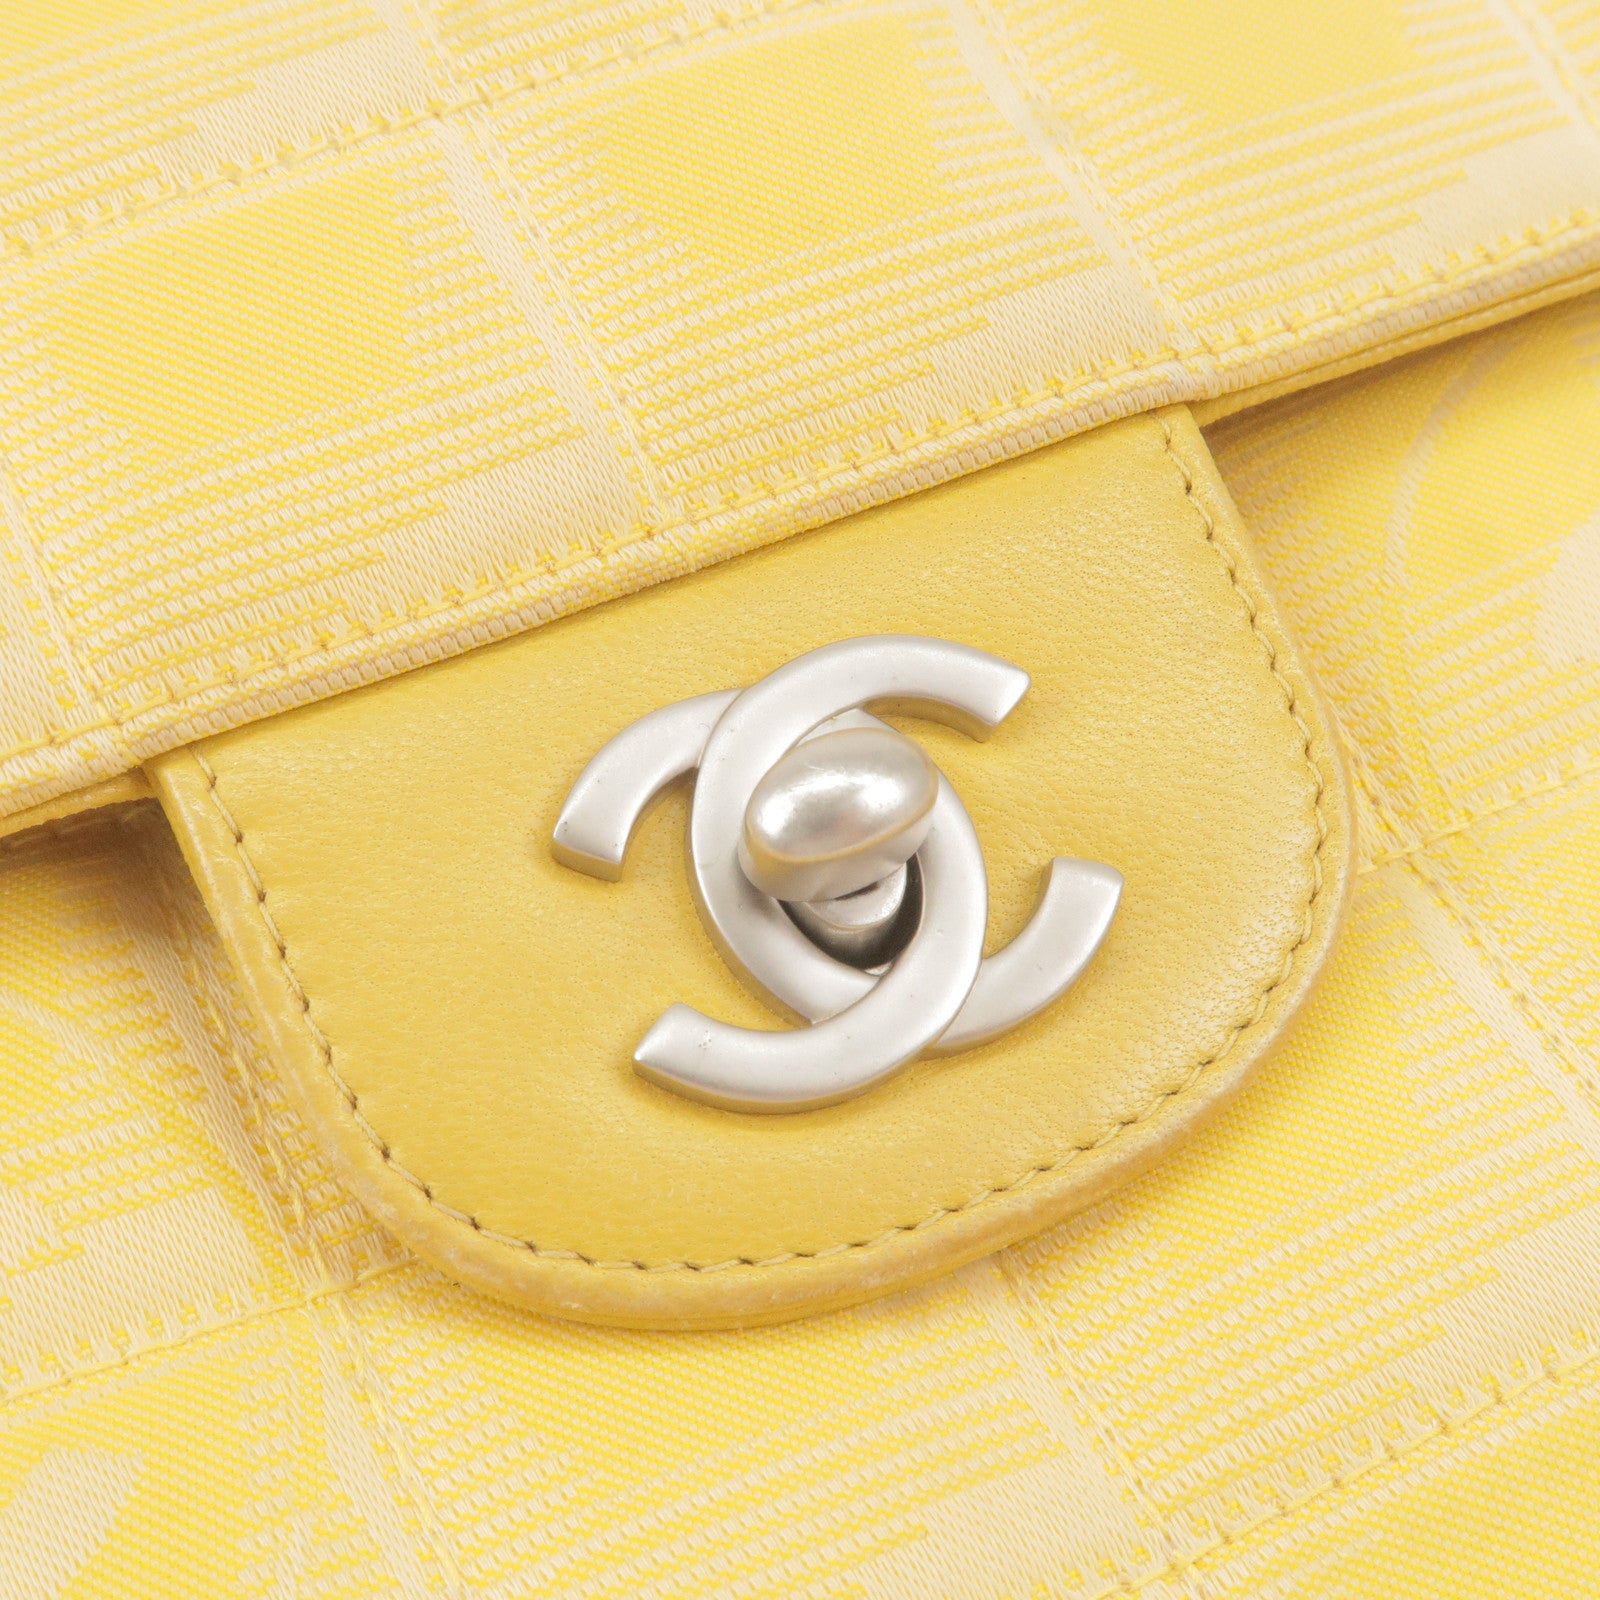 Chanel Pre-owned 1999 Timeless Shoulder Bag - Yellow